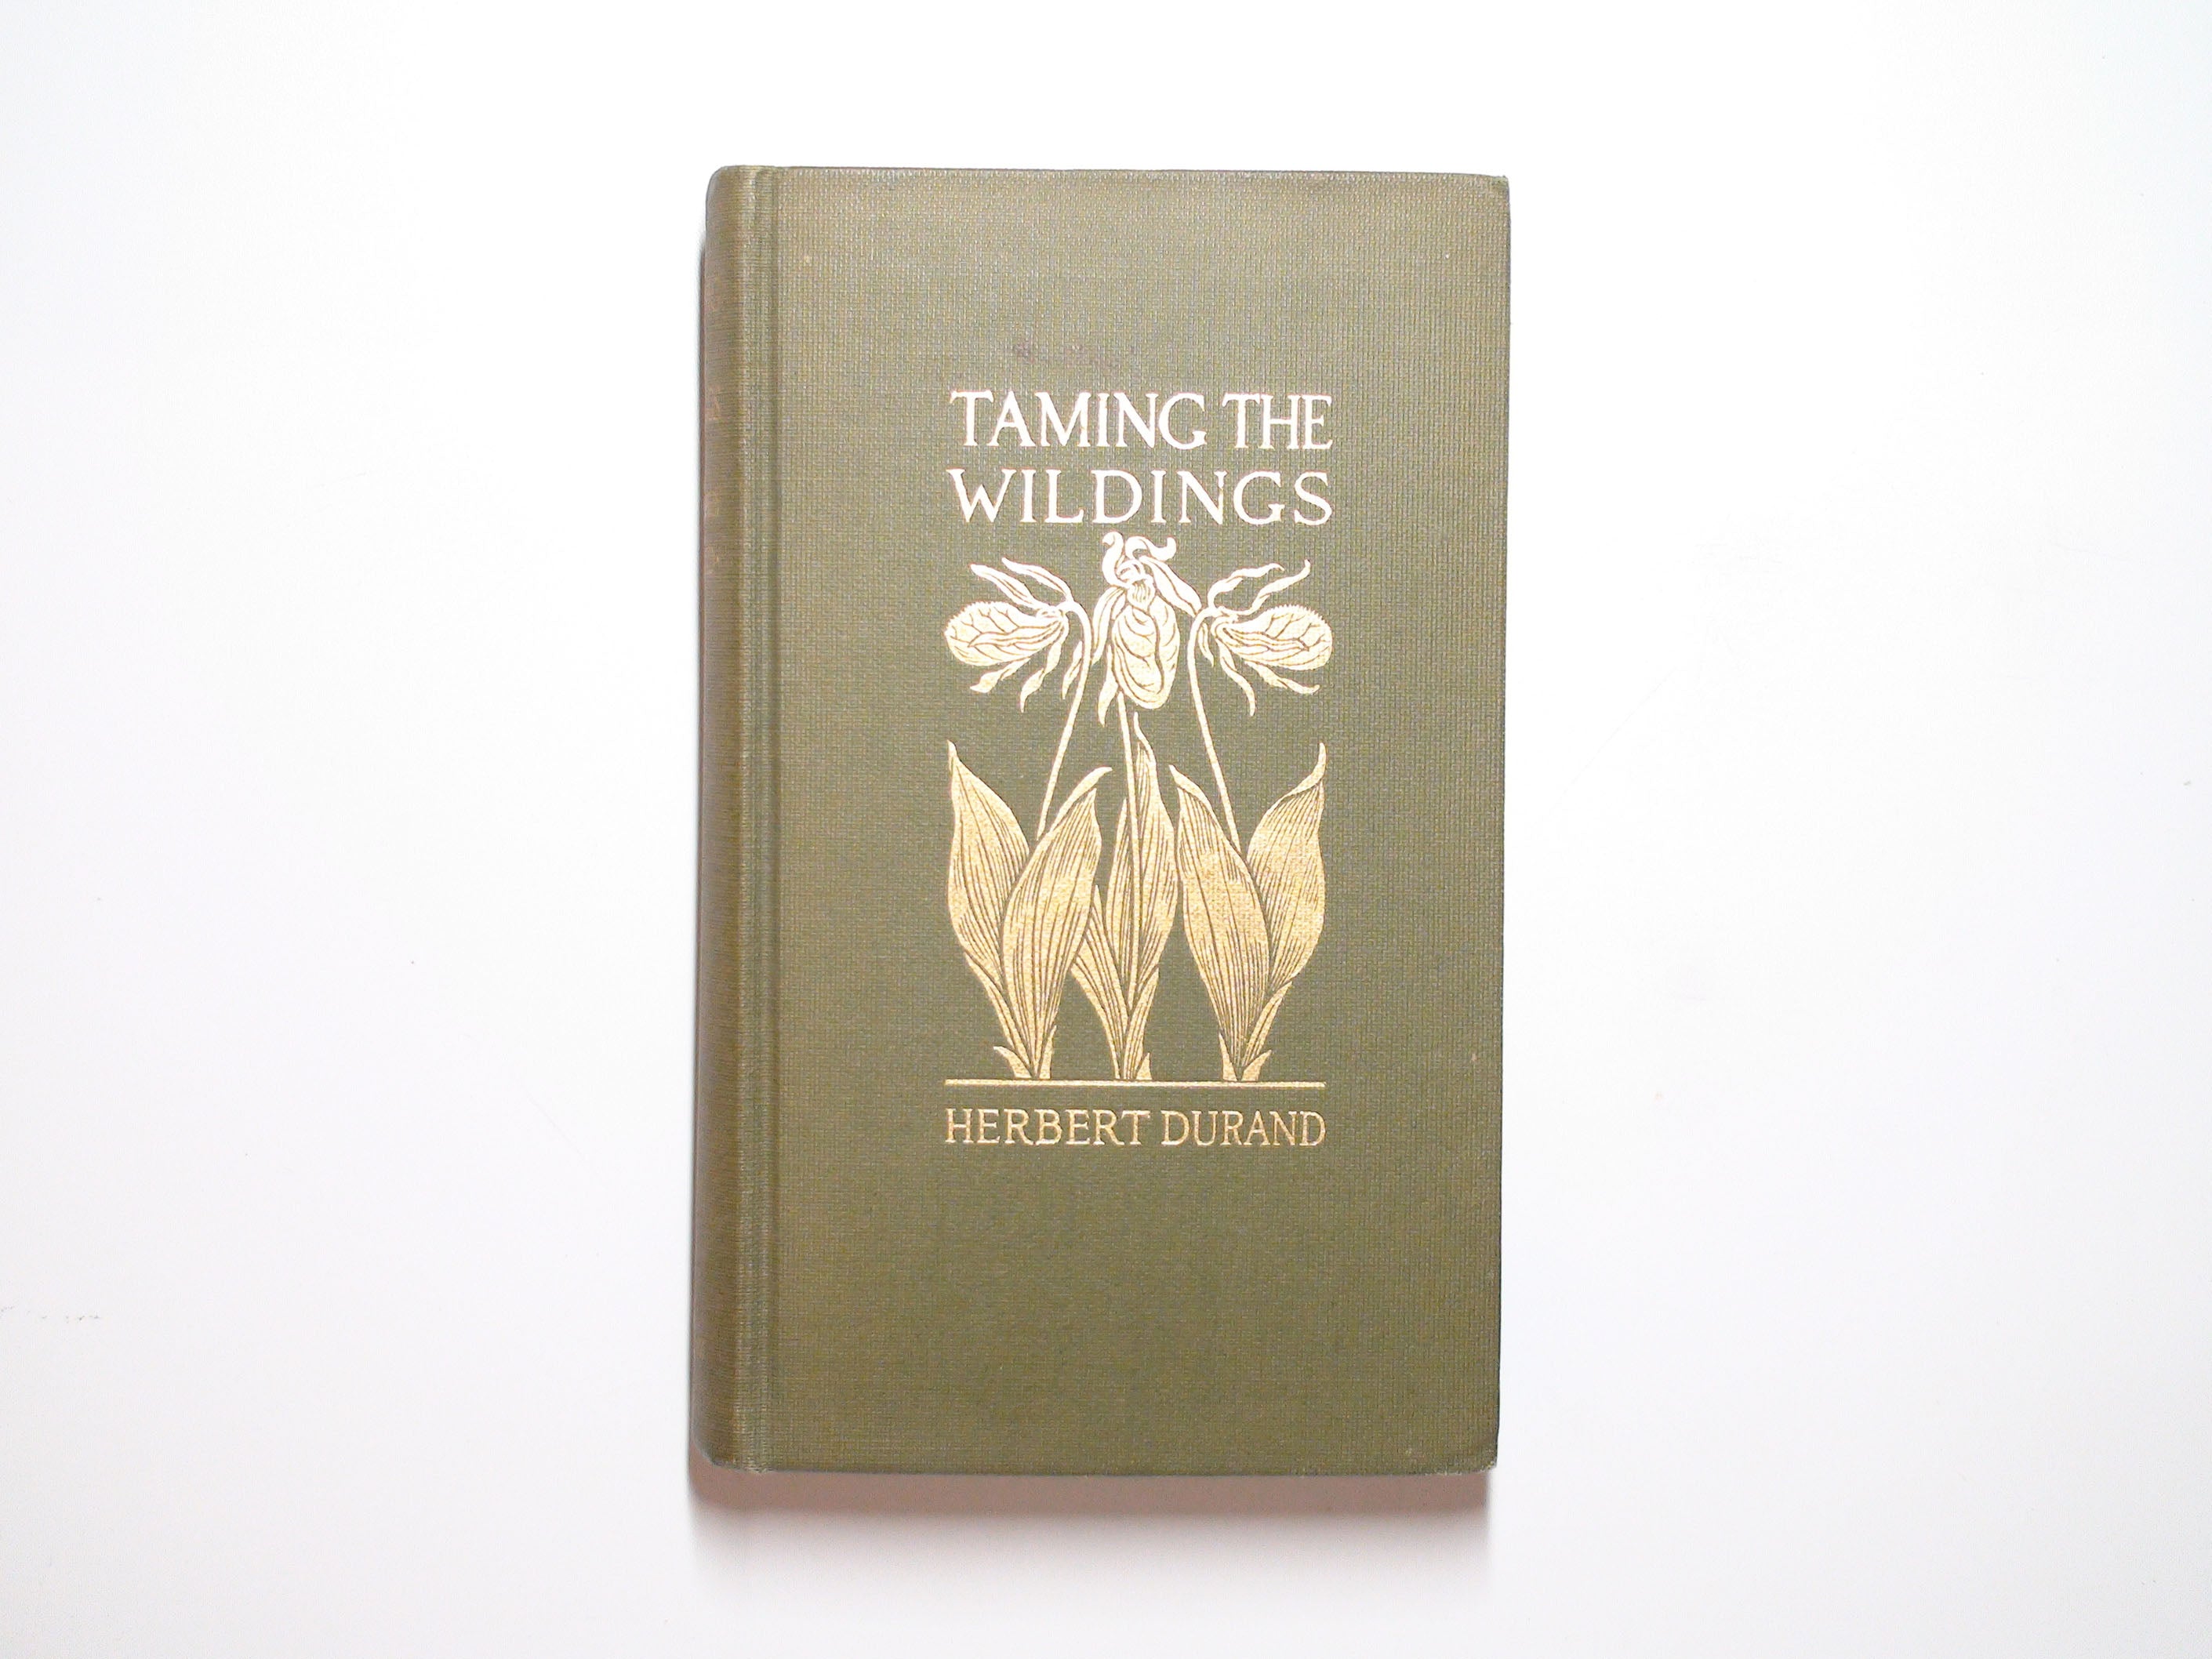 Taming the Wildings, by Herbert Durand, Illustrated, 1st Ed, 1923